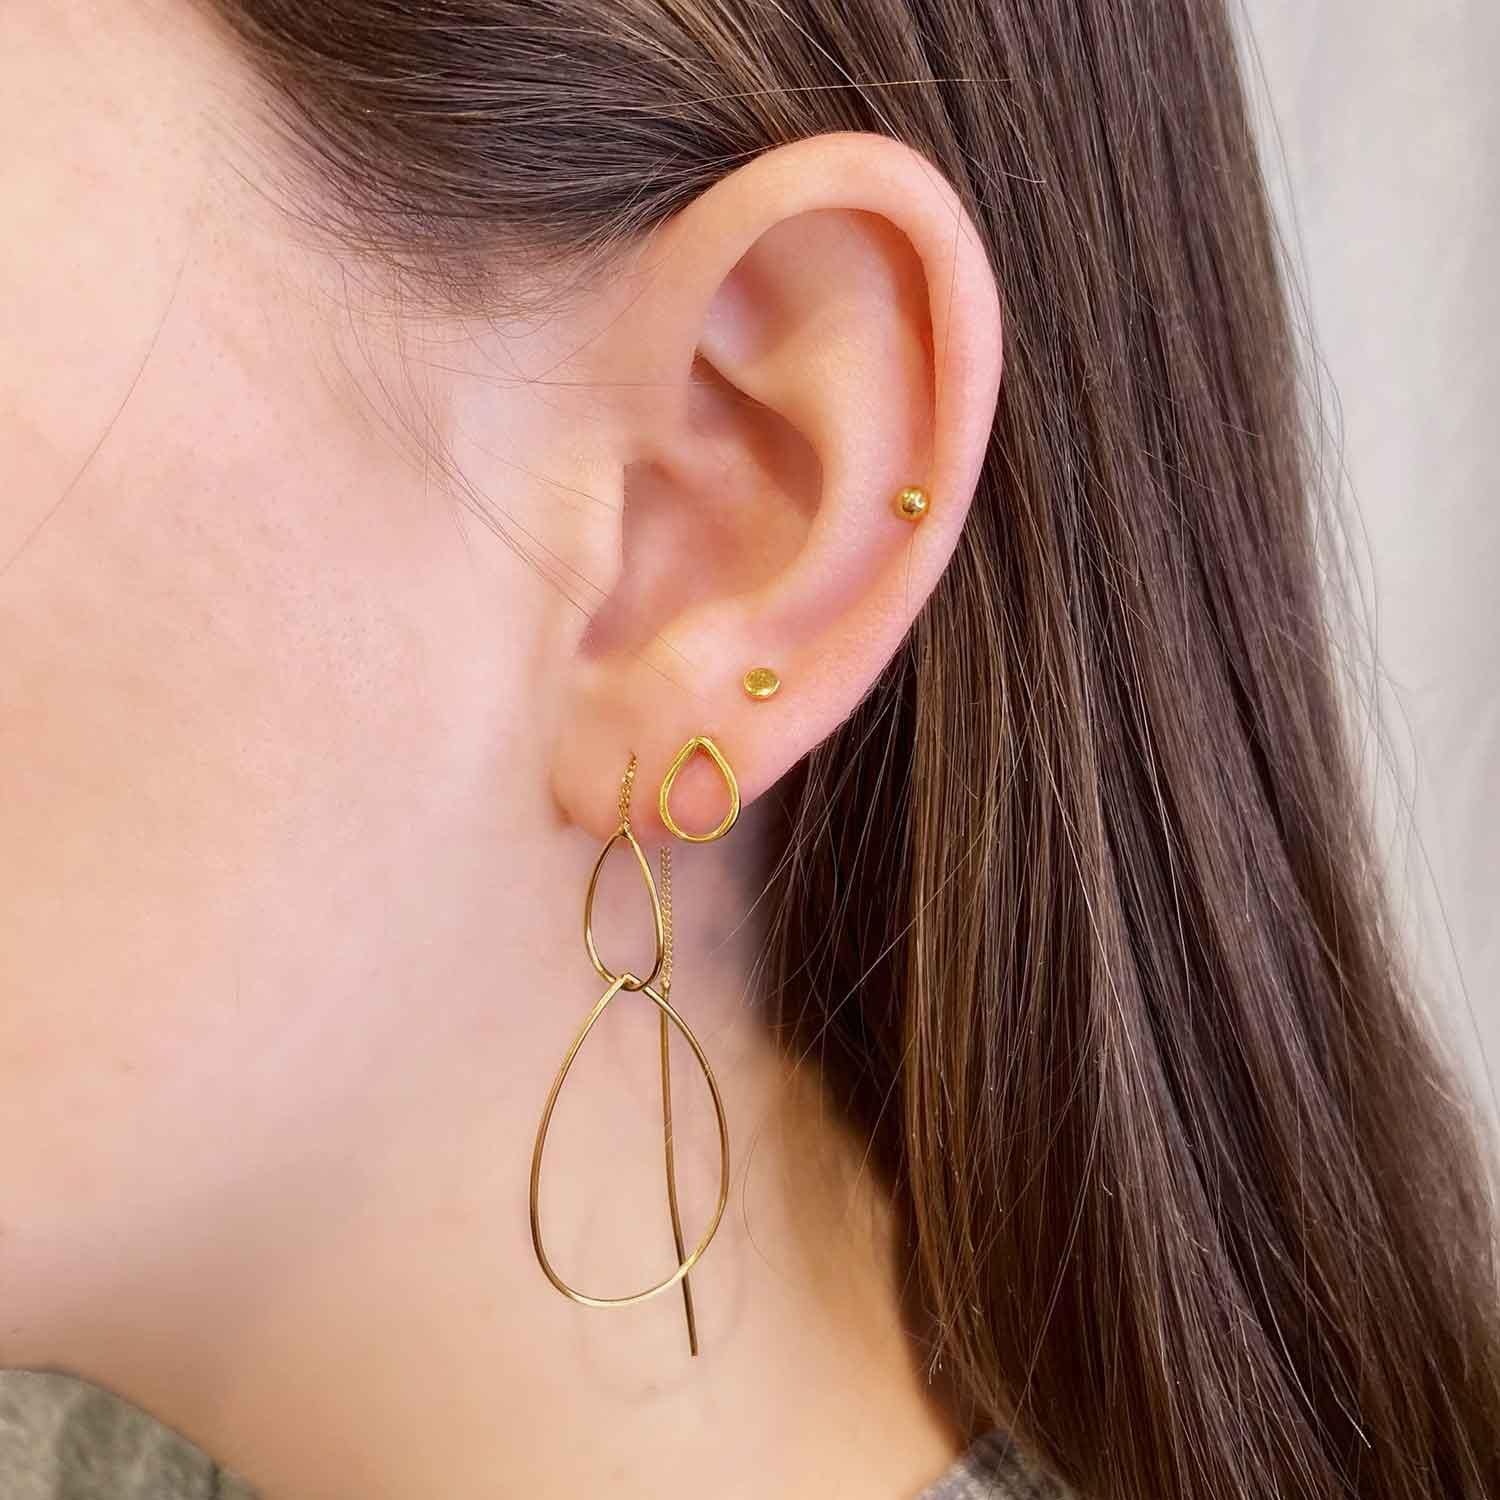 gold plated hanging earrings with double droplets on model, hang oorbel dubbele druppel verguld